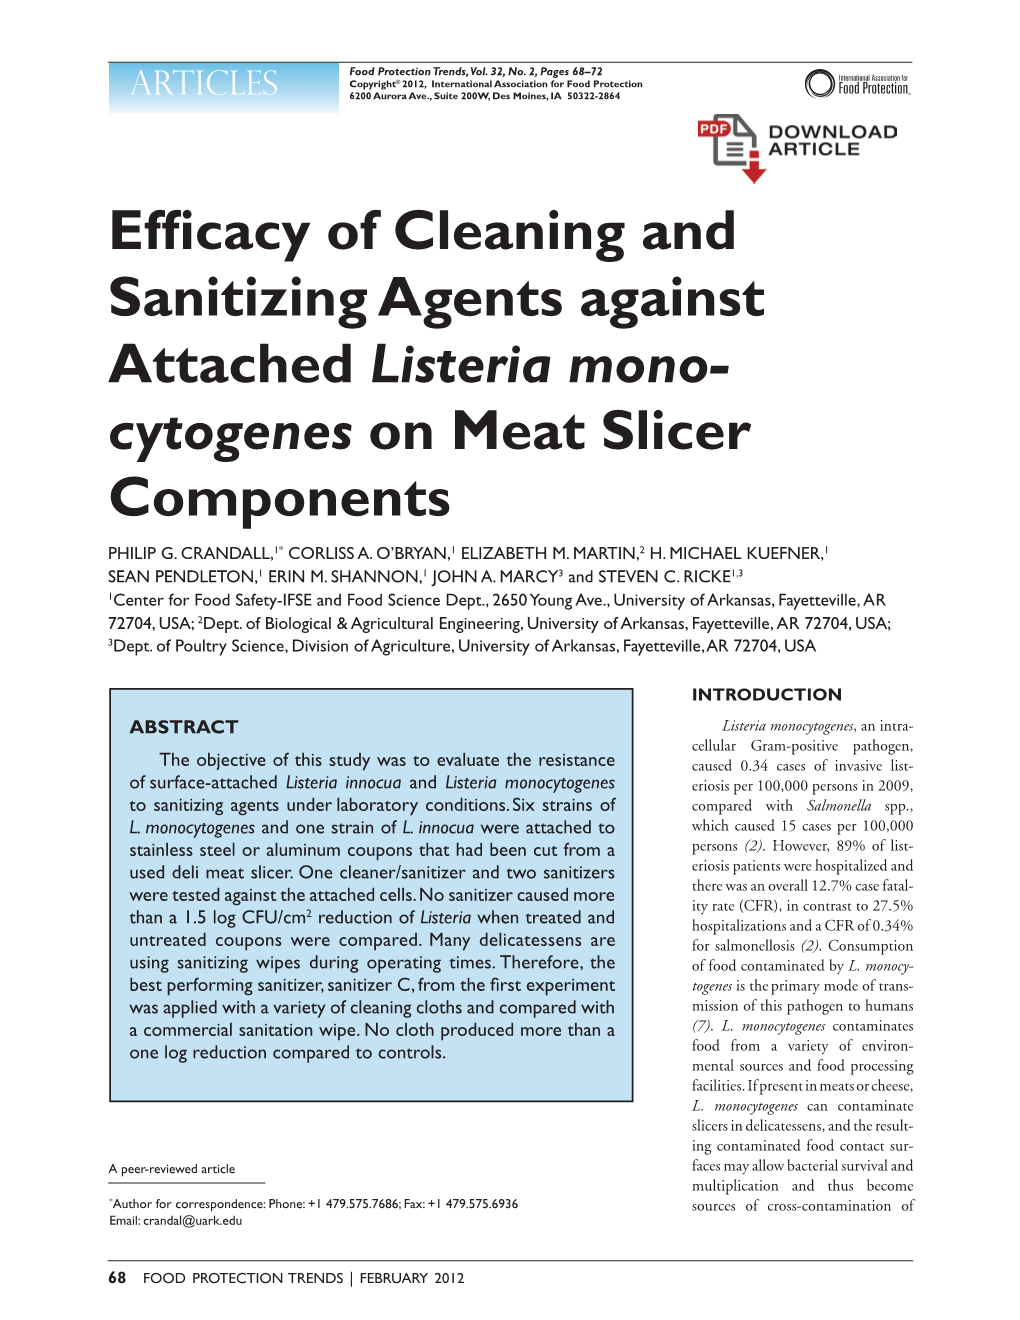 Efficacy of Cleaning and Sanitizing Agents Against Attached Listeria Mono- Cytogenes on Meat Slicer Components Philip G